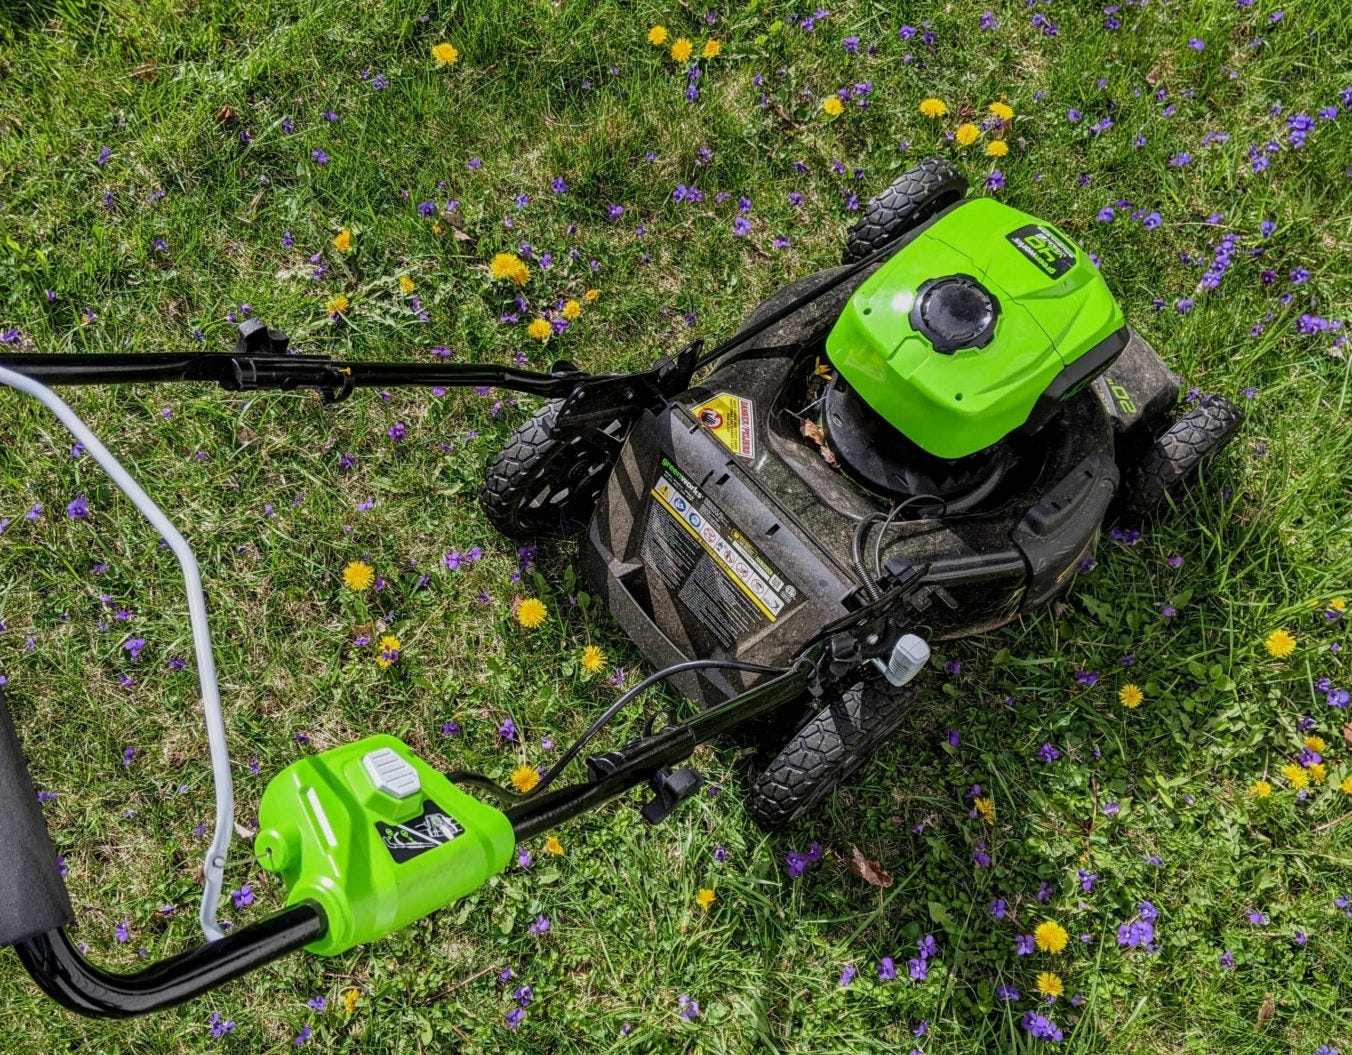 The Future Is Electric for Lawn Tools. Here's a Stock to Play It. - Barron's